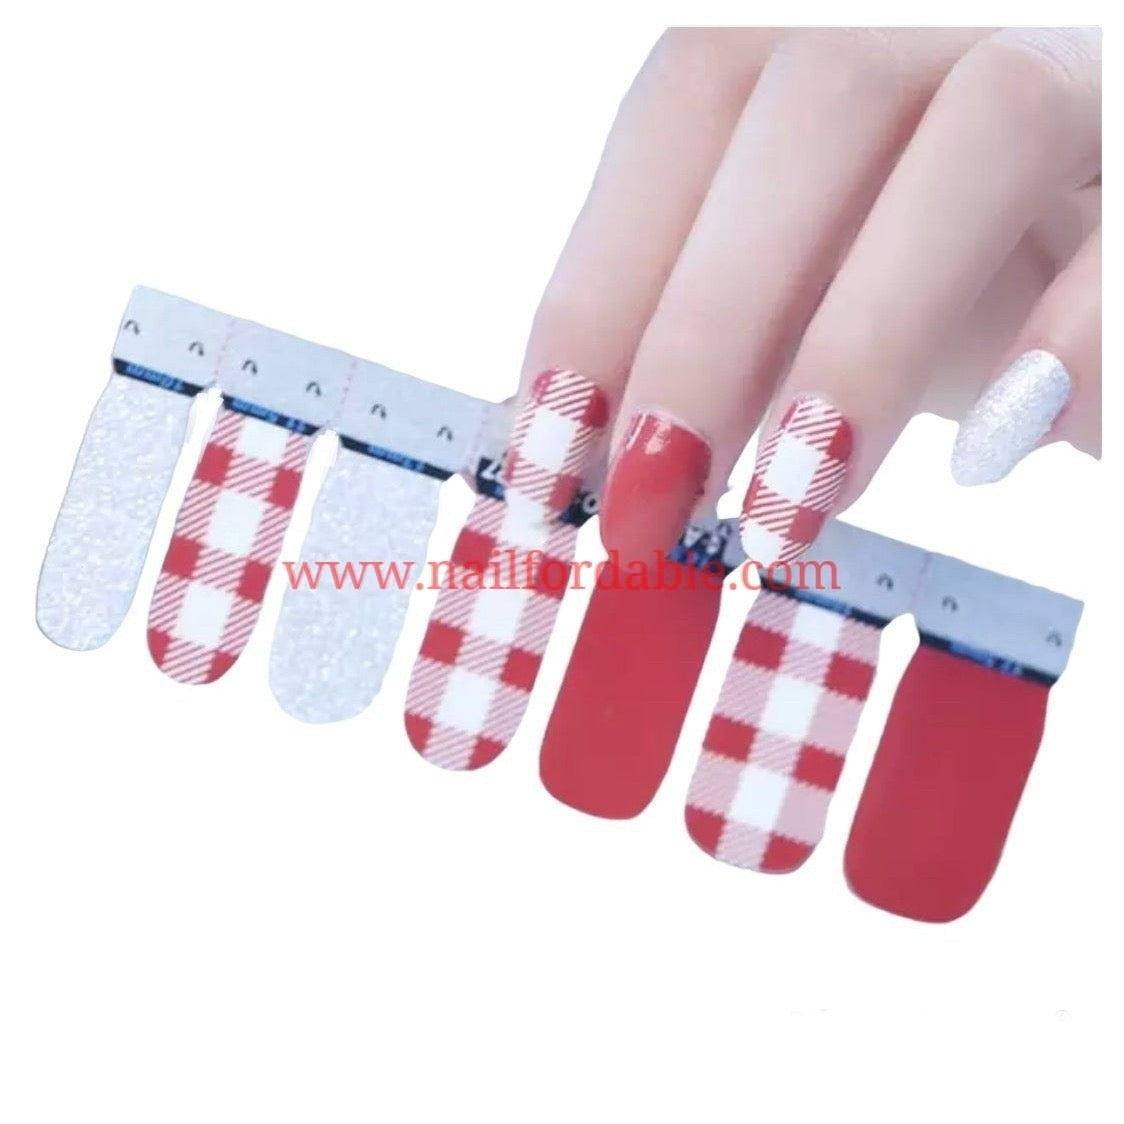 Silver-red-plaid Nail Wraps | Semi Cured Gel Wraps | Gel Nail Wraps |Nail Polish | Nail Stickers